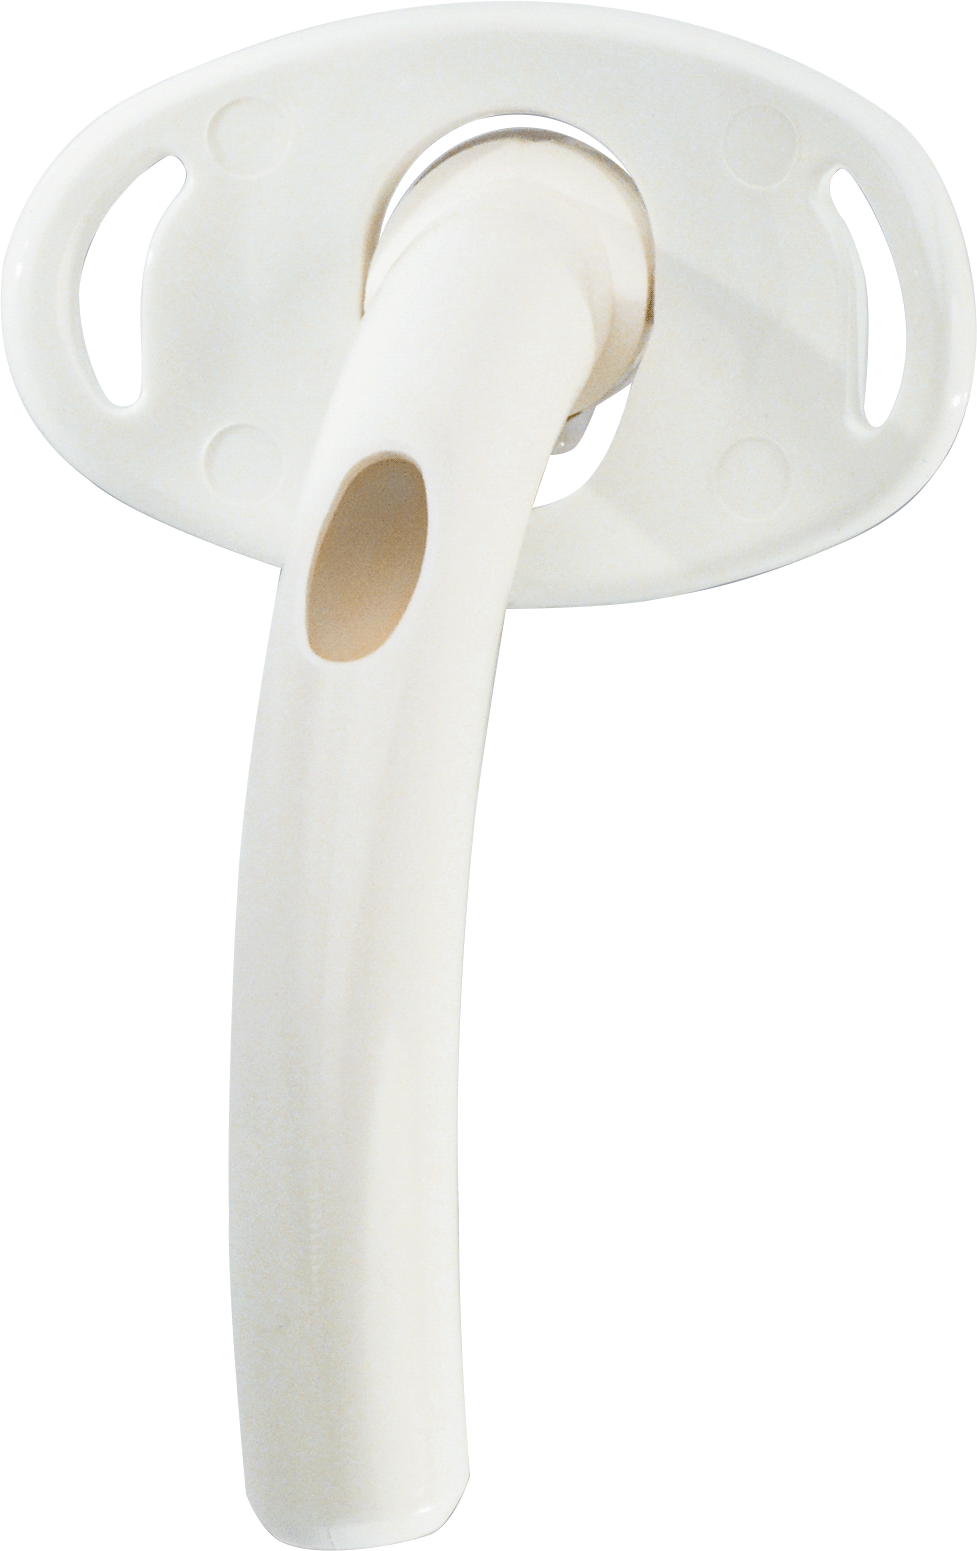 EA/1 - Mallinckrodt Medical Inc Shiley&trade; Fenestrated Reusable Cannula Cuffless Tracheostomy Tube 6 Size 76mm L, 6-2/5mm I.D. x 10-4/5mm O.D., Designed for General Pulmonary Hygiene - Best Buy Medical Supplies